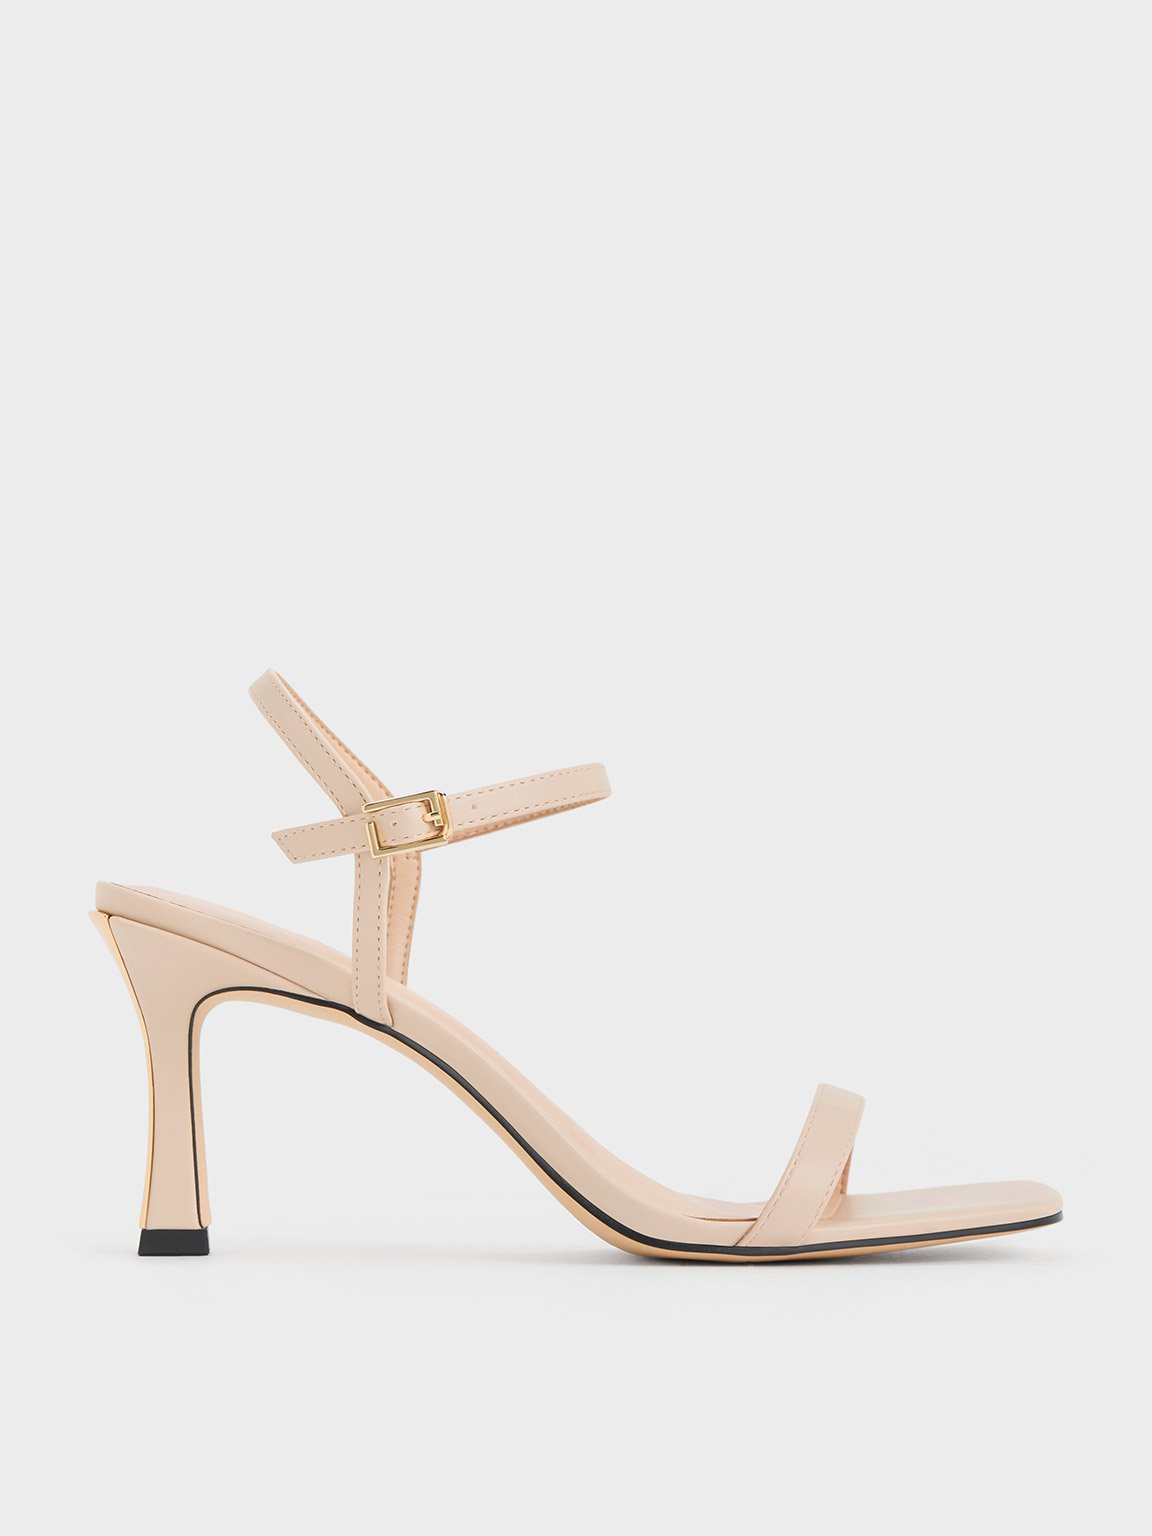 Nude Square-Toe Heeled Sandals - CHARLES & KEITH SG